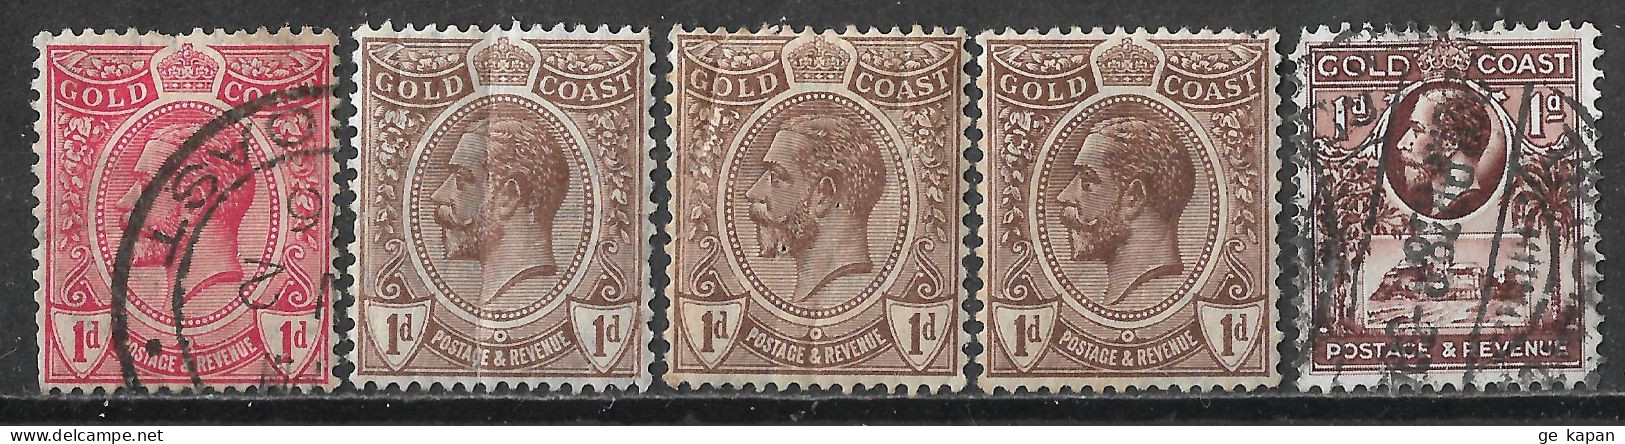 1913-1928 GOLD COAST SET OF 2 USED + 3 MNH STAMPS (Michel # 63a.76.89) CV €2.90 - Gold Coast (...-1957)